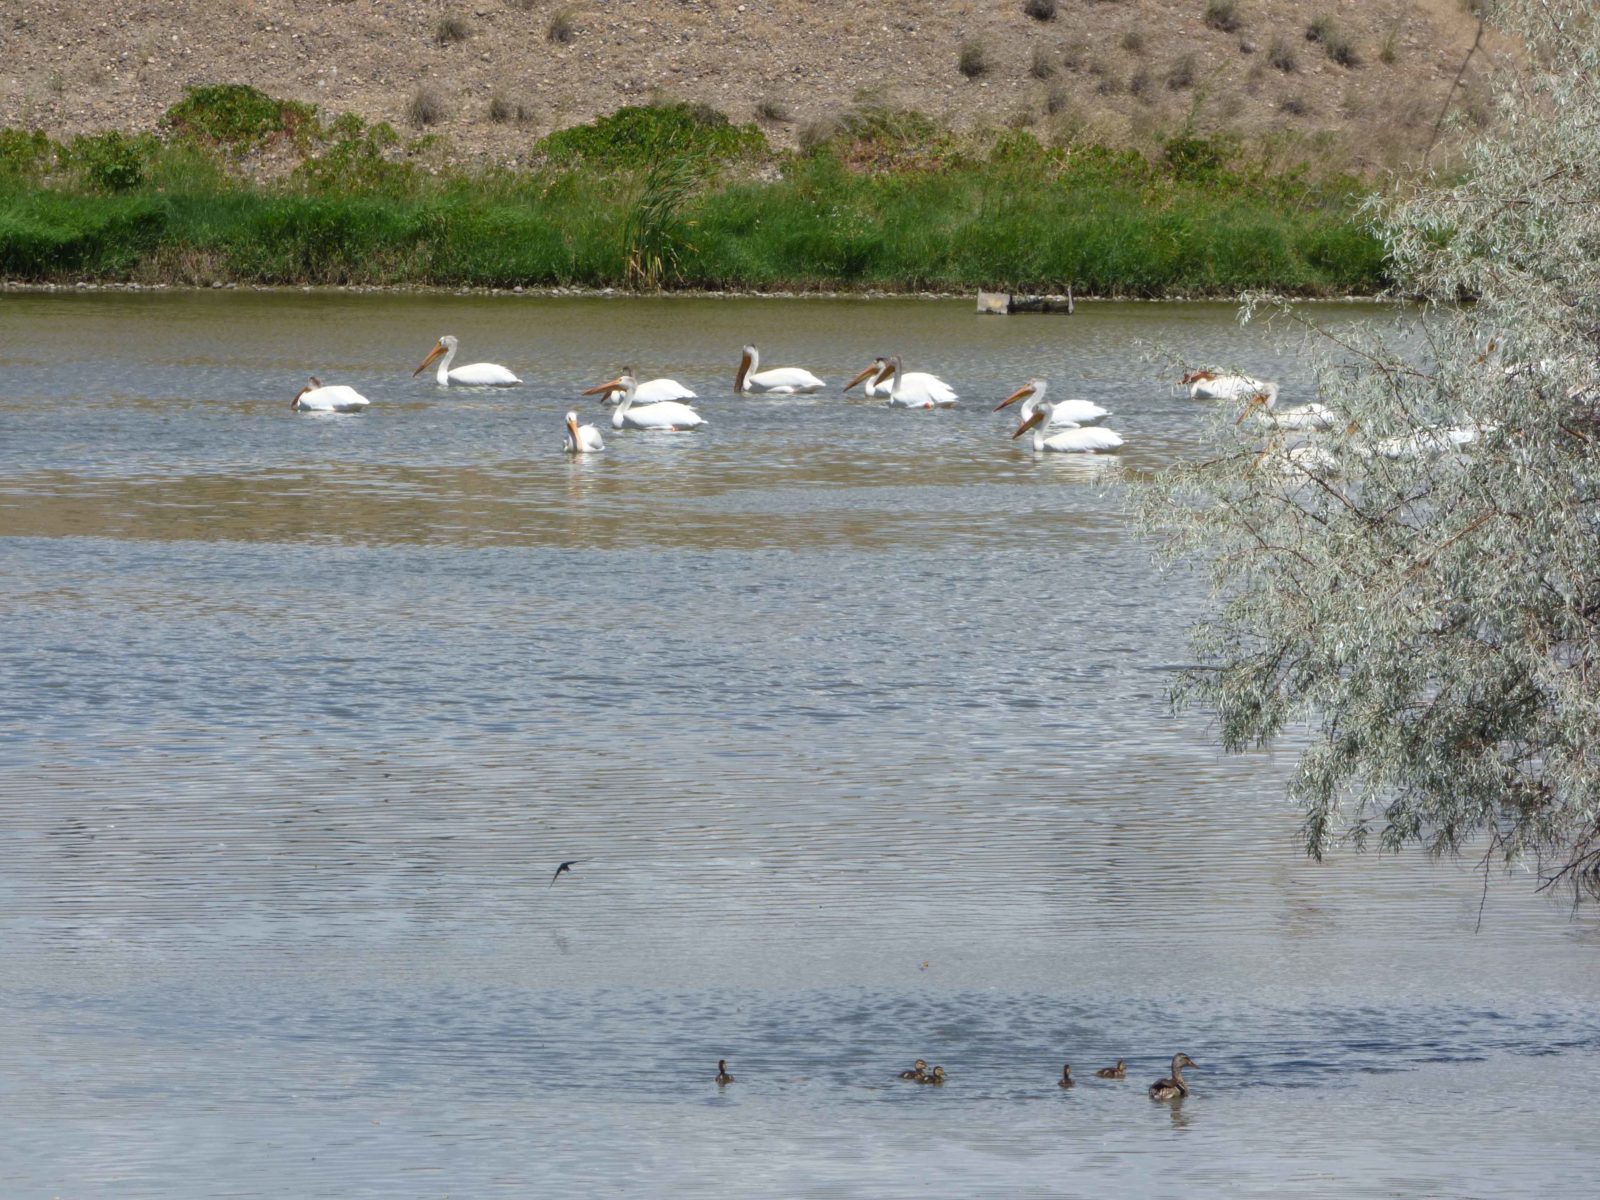 American White Pelicans and Mallard Ducks in the pond near The Willows.